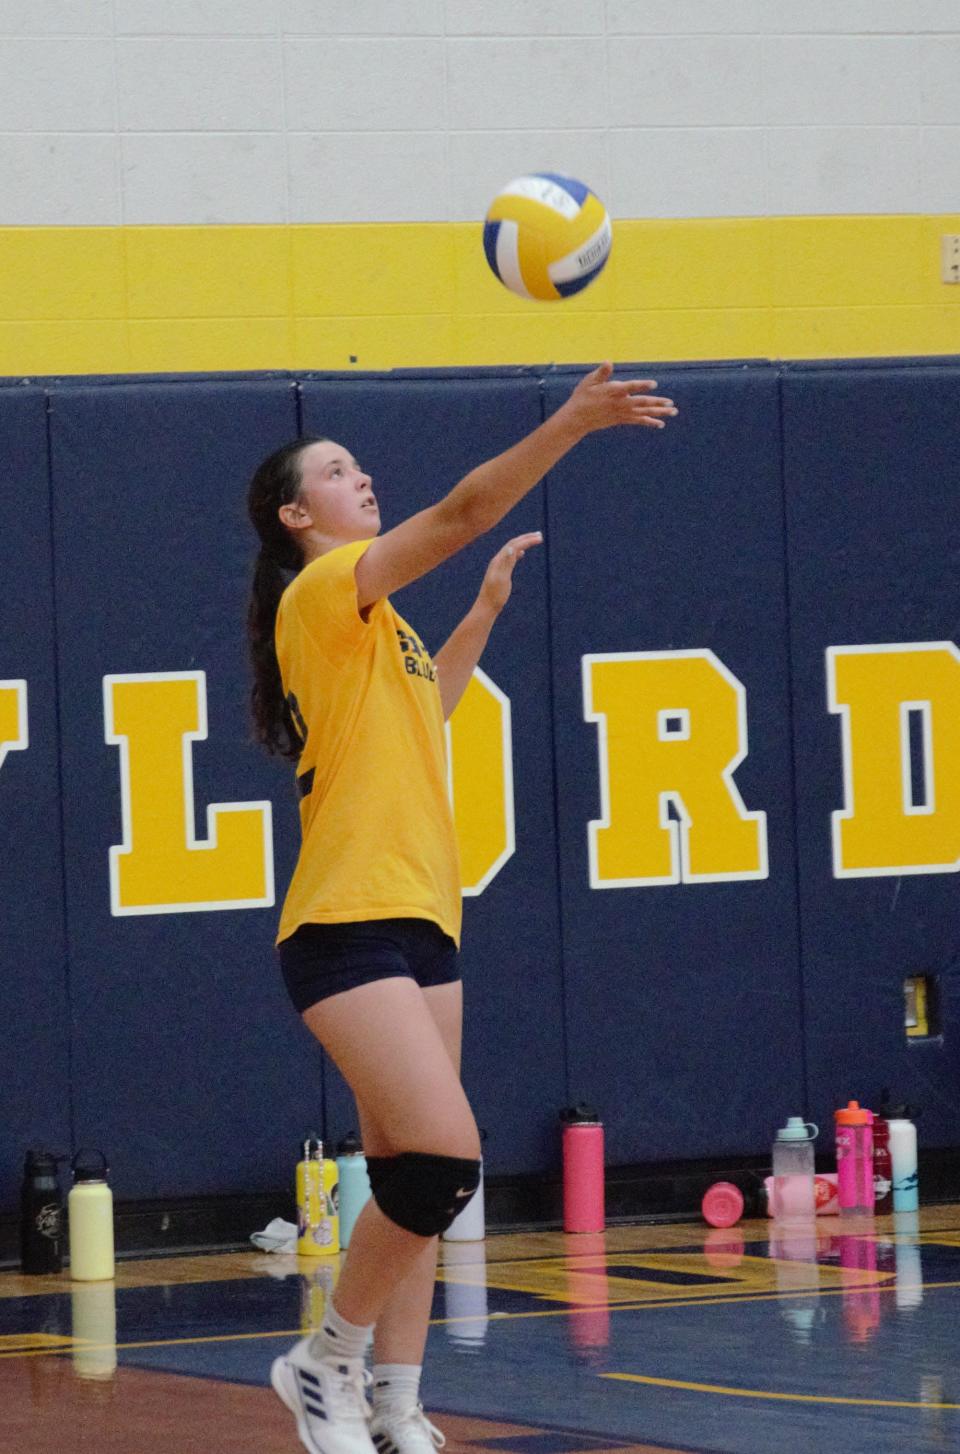 Gaylord's Kennedy Wangler serves during tryouts on Tuesday, August 8.